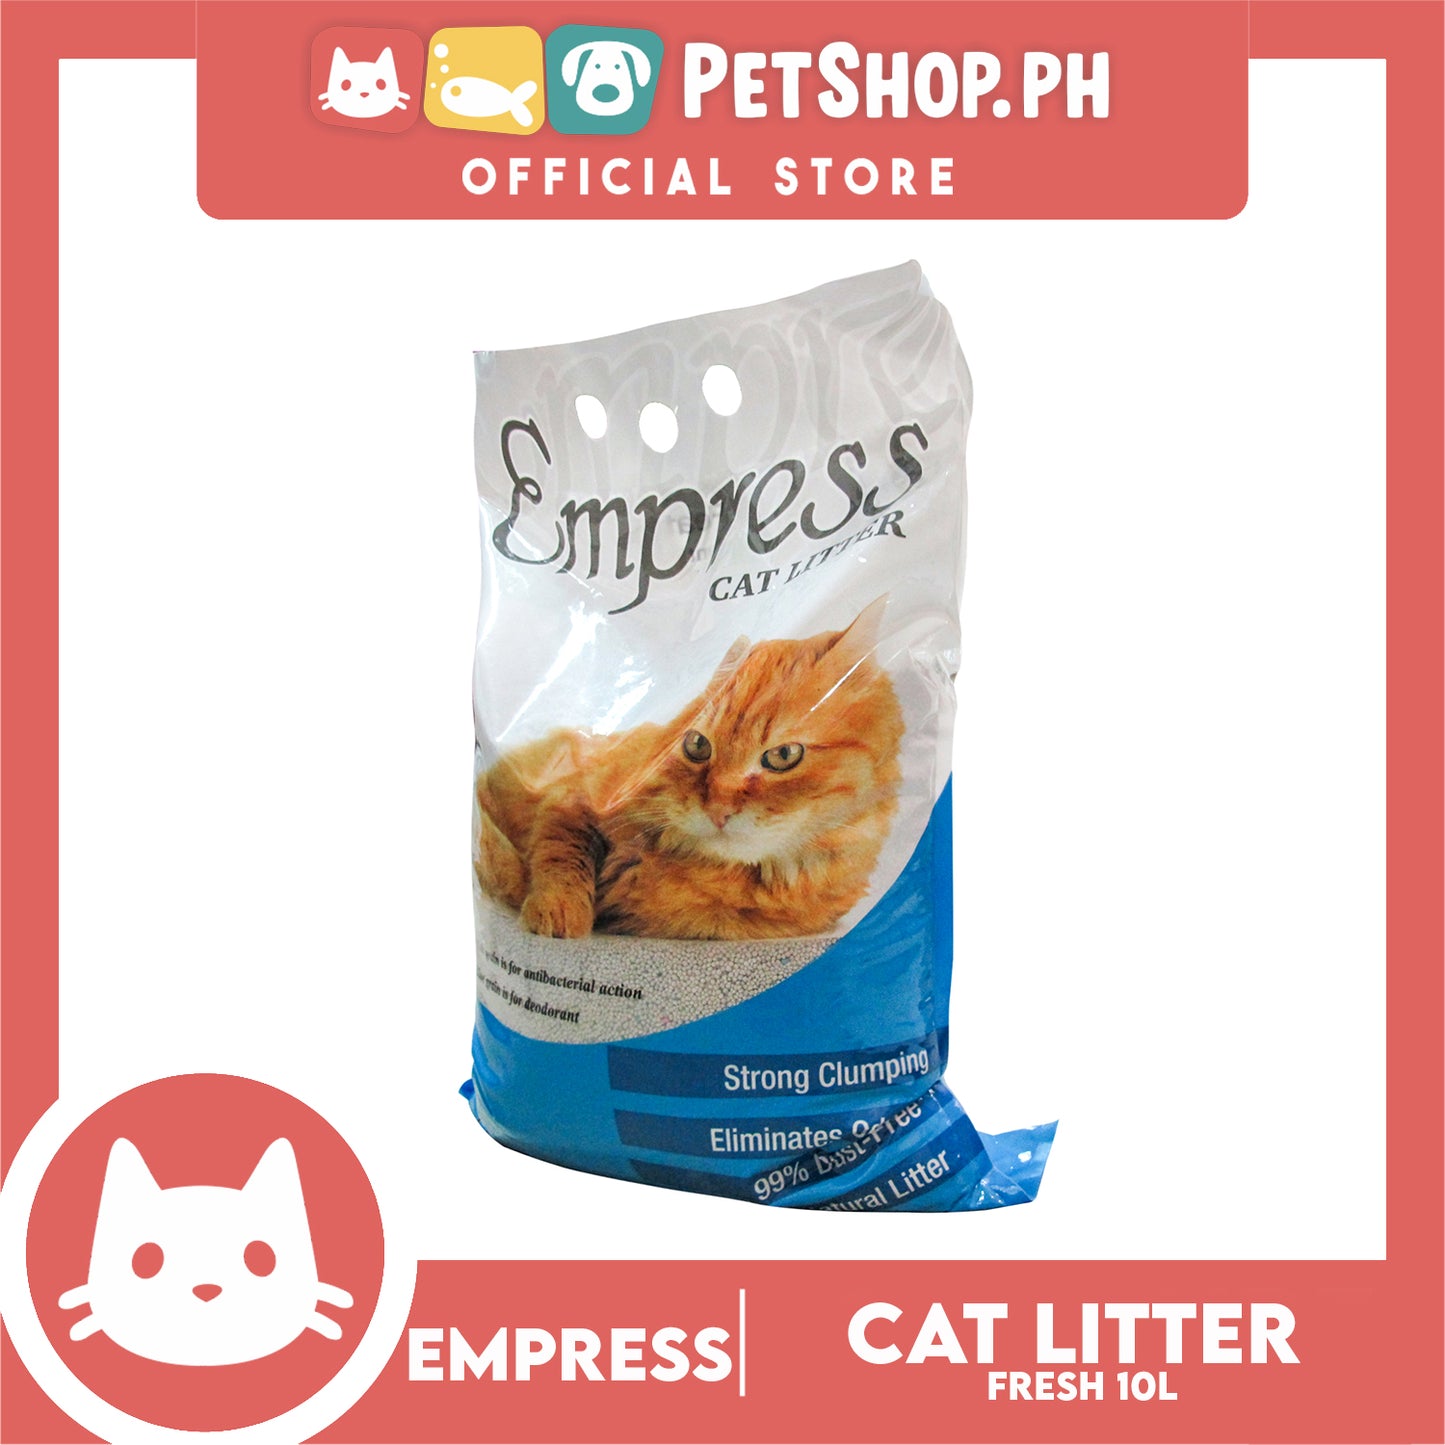 Empress Cat Litter 10 Liters (Fresh Scent) Strong Clumping, Eliminates Odors, 99% Dust Free, 100% Natural Cat Litter